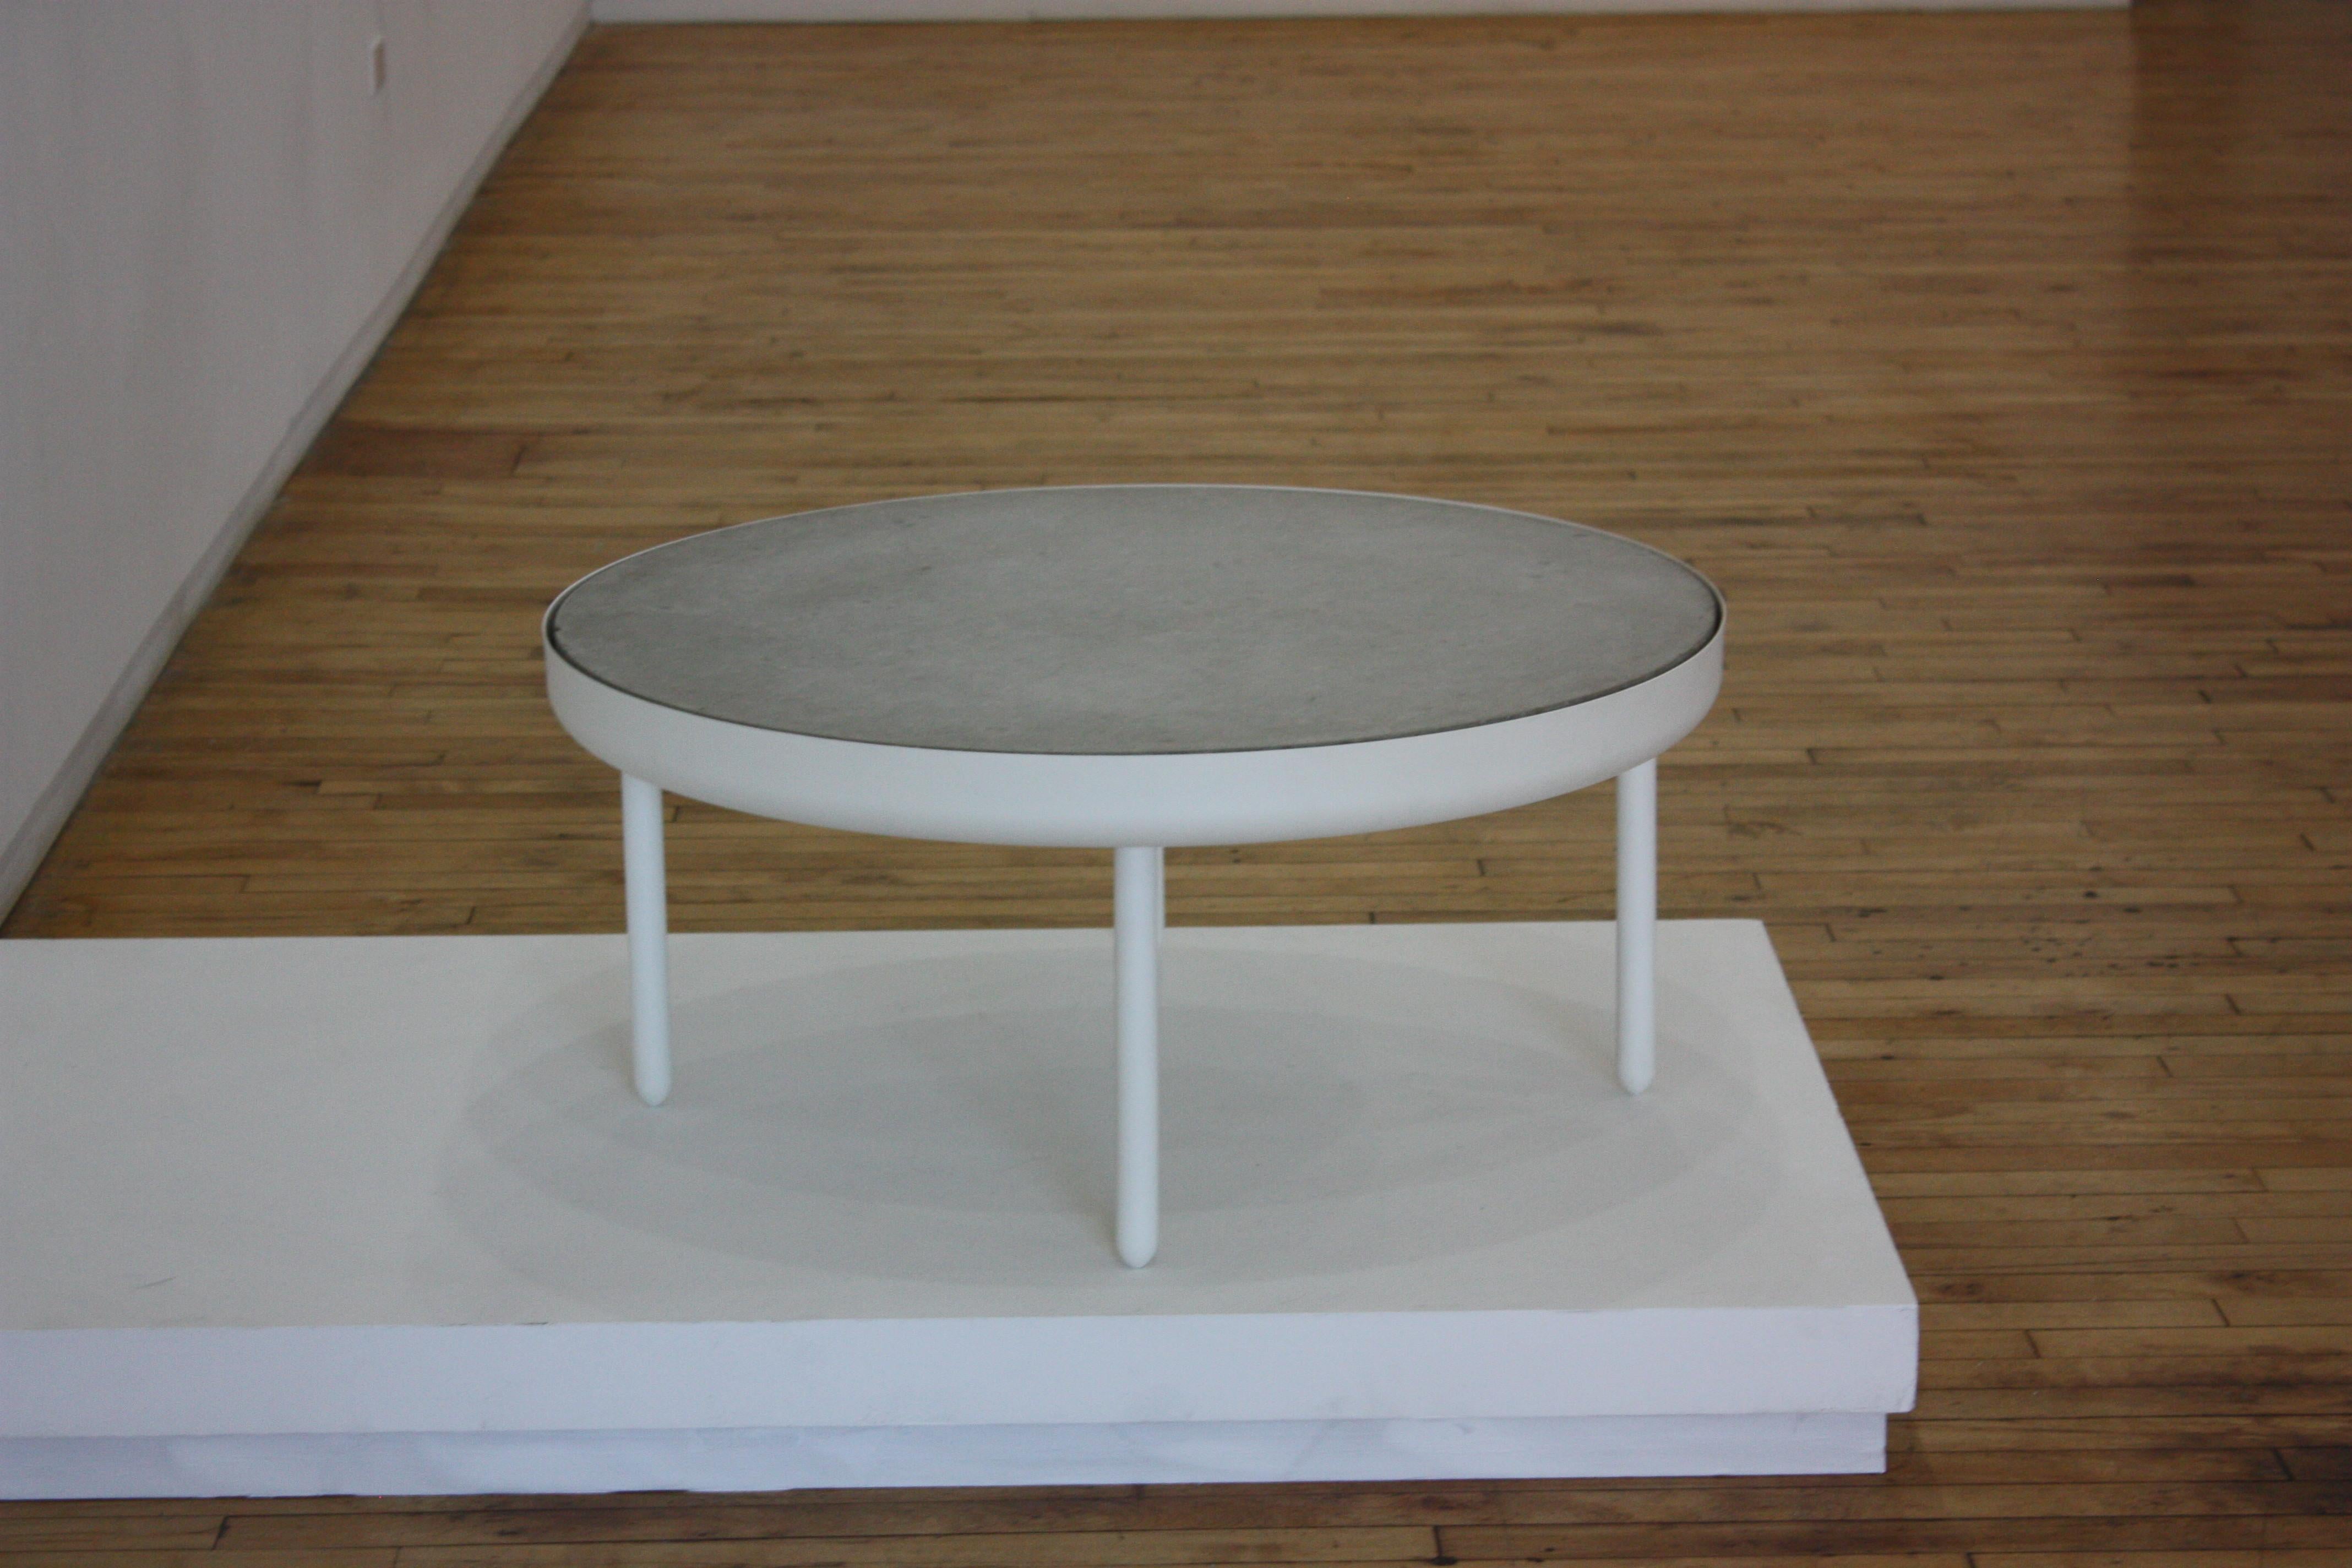 The standard table is made in spun, machined and powder-coated aluminum with an inset cast concrete top. Produced for The New, the inaugural show of Volume Gallery, 2010. Variations and powder colors and tops are available upon request. Limited